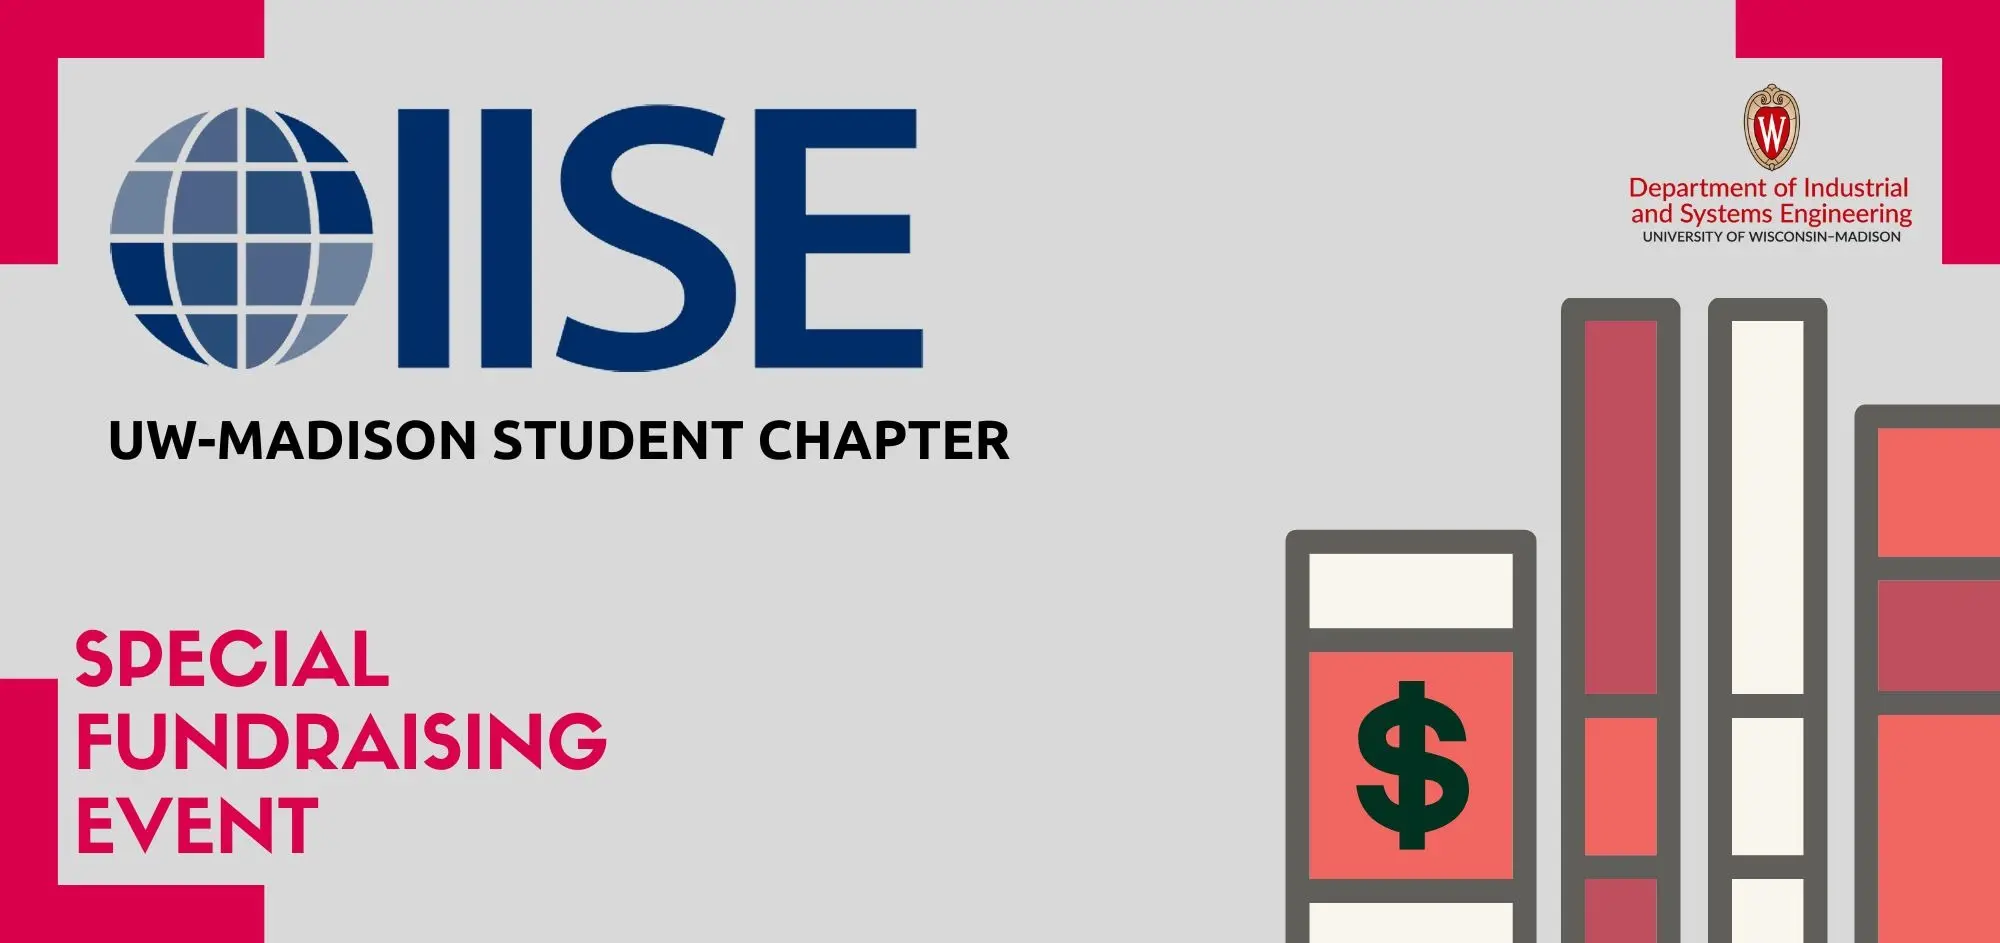 IISE student org, UW-Madison chapter fundraising event with graphic and dollar sign